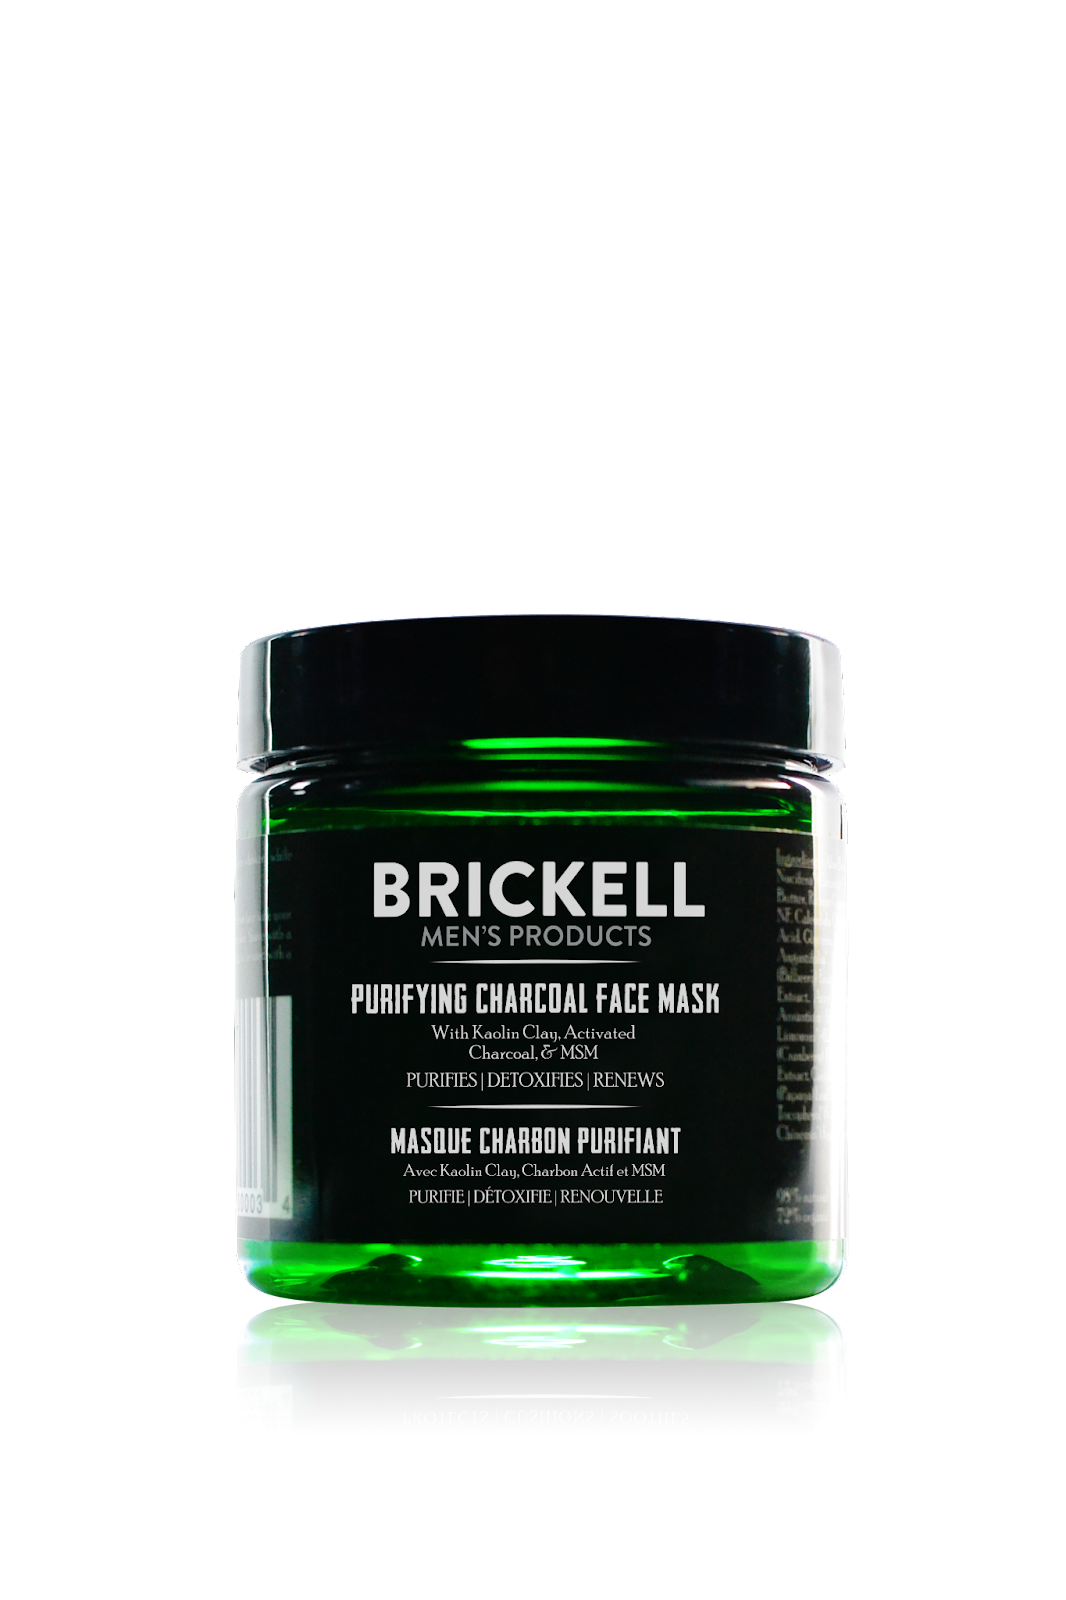 Brickell Men’s Products Purifying Charcoal Face Mask